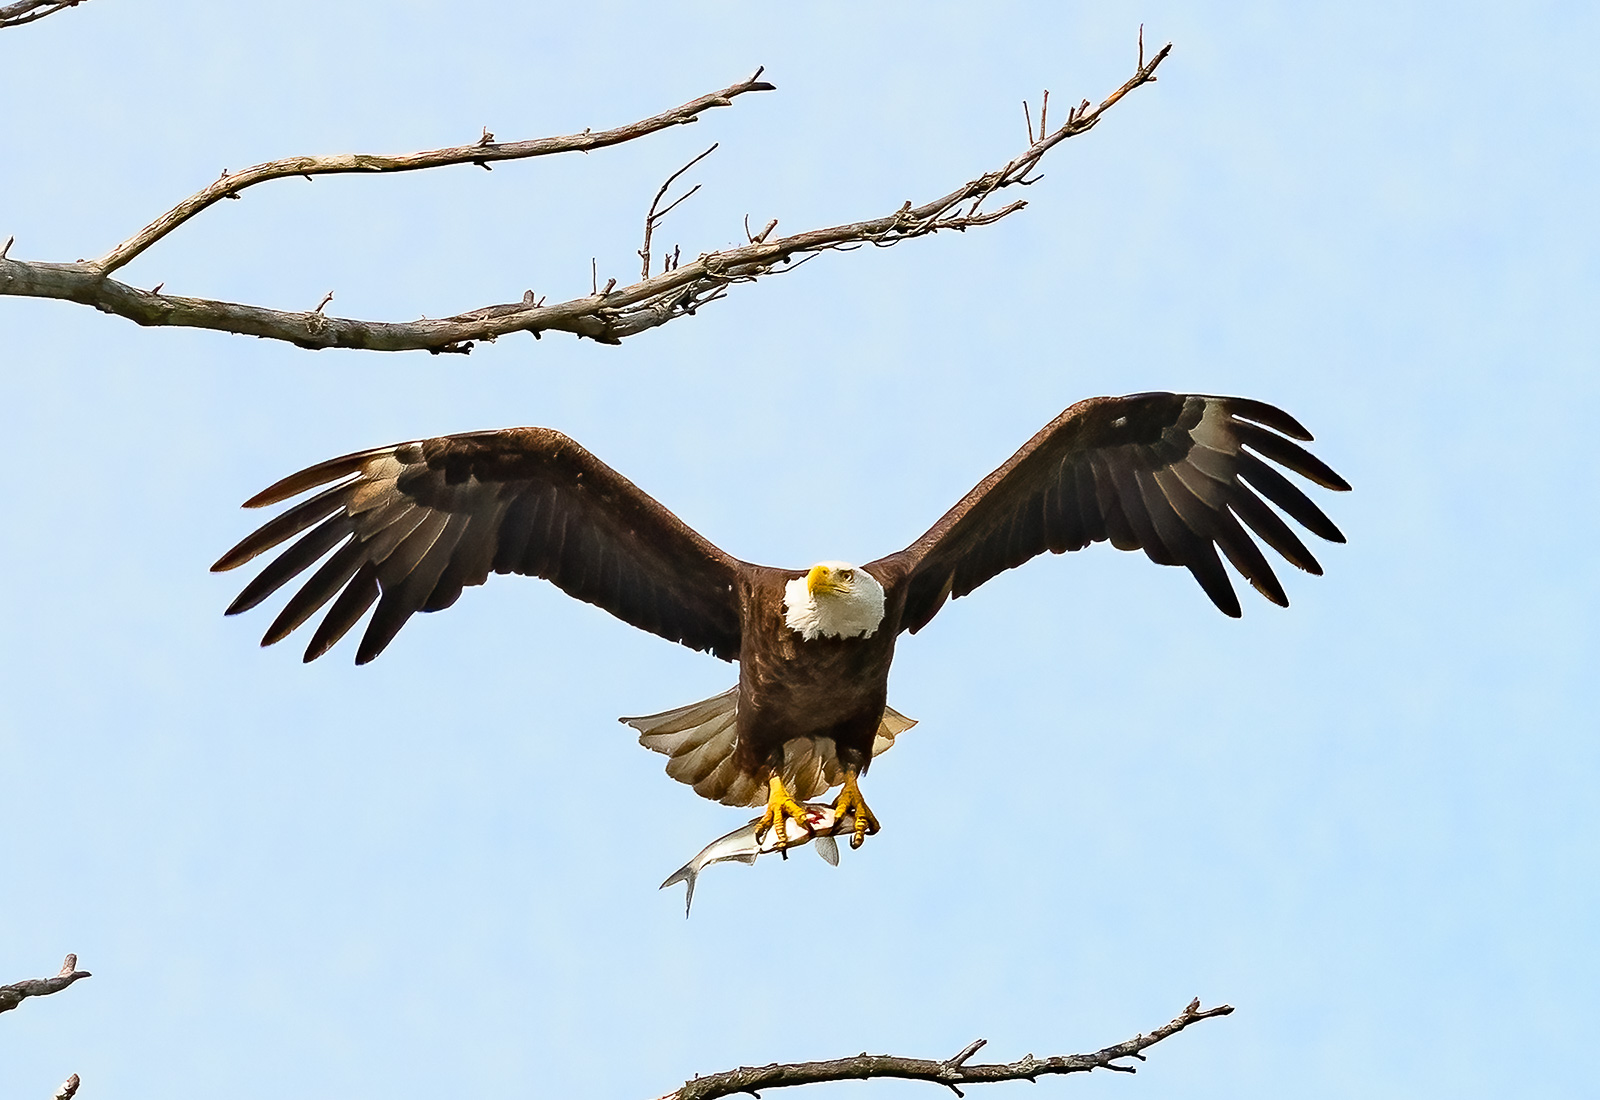 Eagles deliver fish to the eaglets in the nest